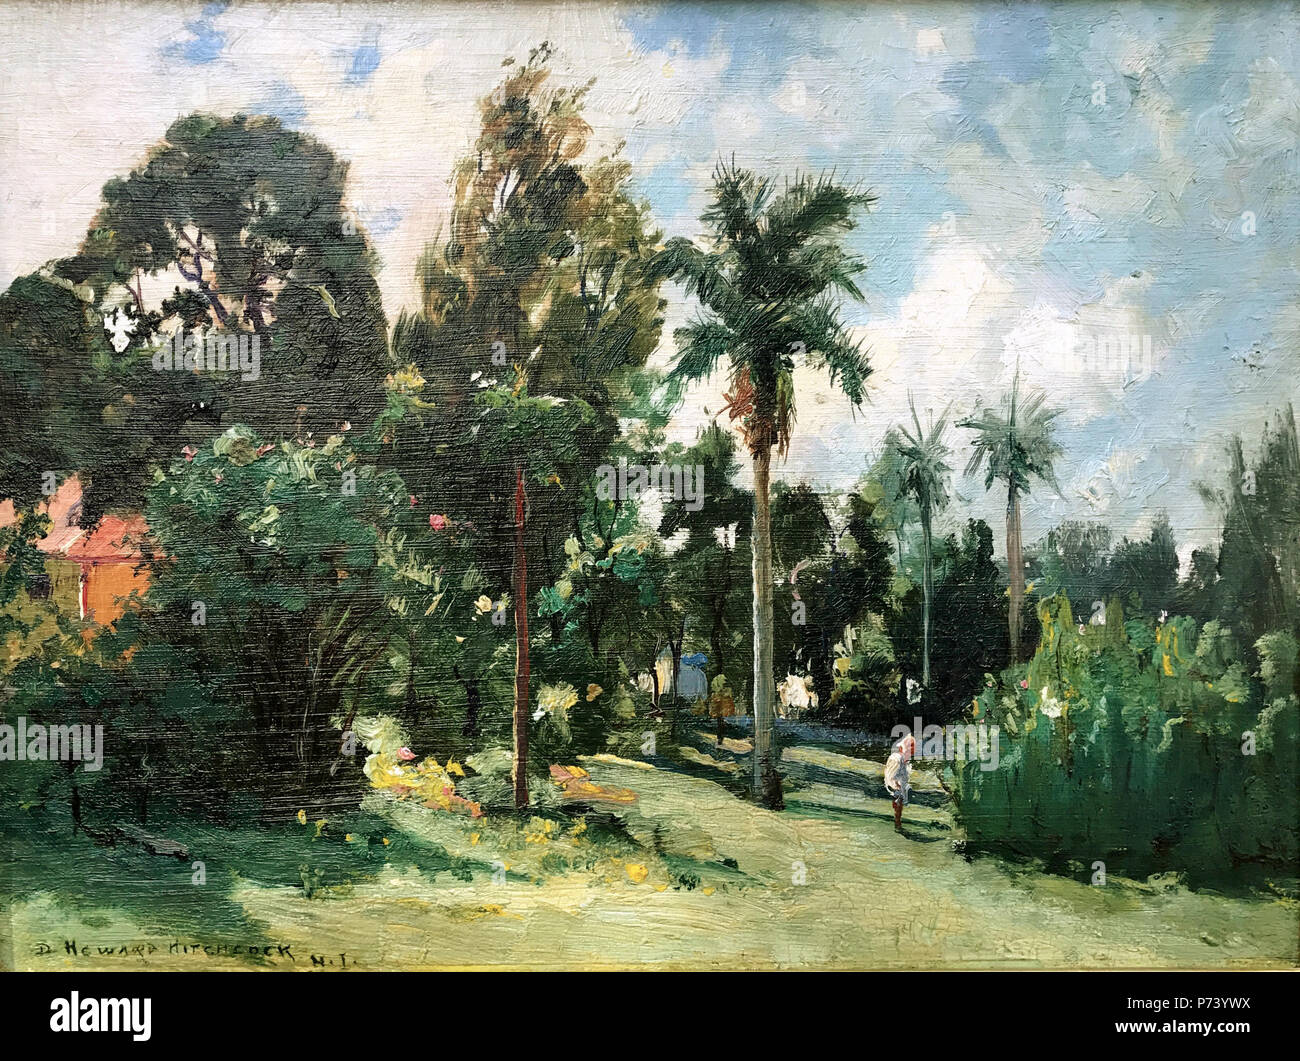 English: Yard in Nuuanu by David Howard Hitchcock, circa 1909-10, oil on early black artist's board, 12 x 16 in. This is D. Howard Hitchcock’s home on Judd St. near Nuuanu St. in Honolulu, Hawaii, with Helen Hitchcock, (his daughter) playing in yard . circa 1909-10 20 Yard in Nuuanu by David Howard Hitchcock, c 1909-10 Stock Photo